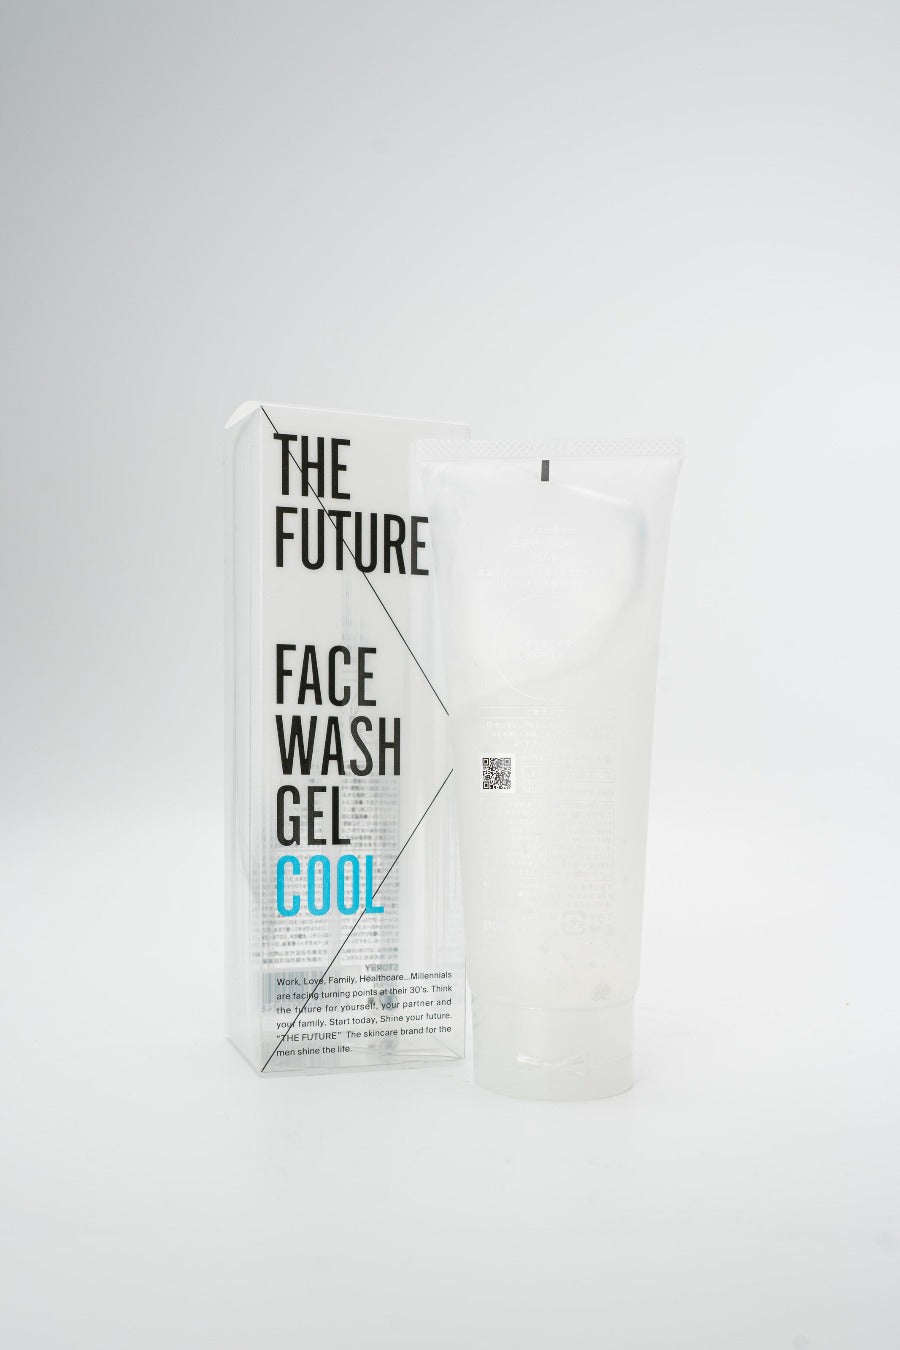 【THE FUTURE】FACE WASH GEL COOL 洗面膏 涼感